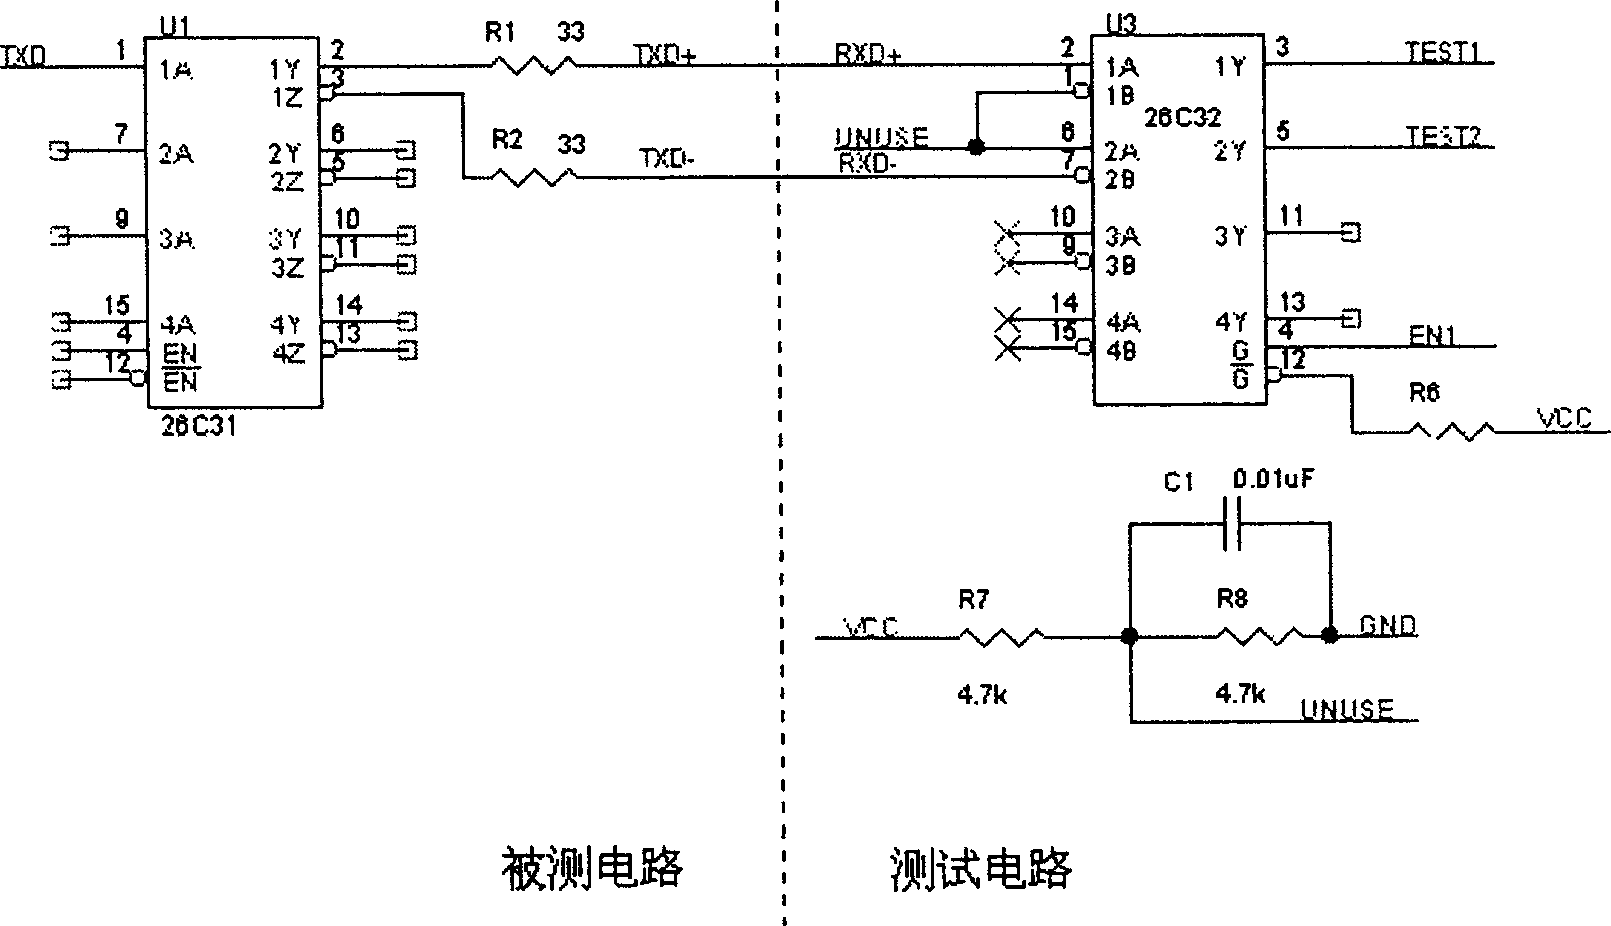 Functional test method for measuring fault at single end of difference serial circuit